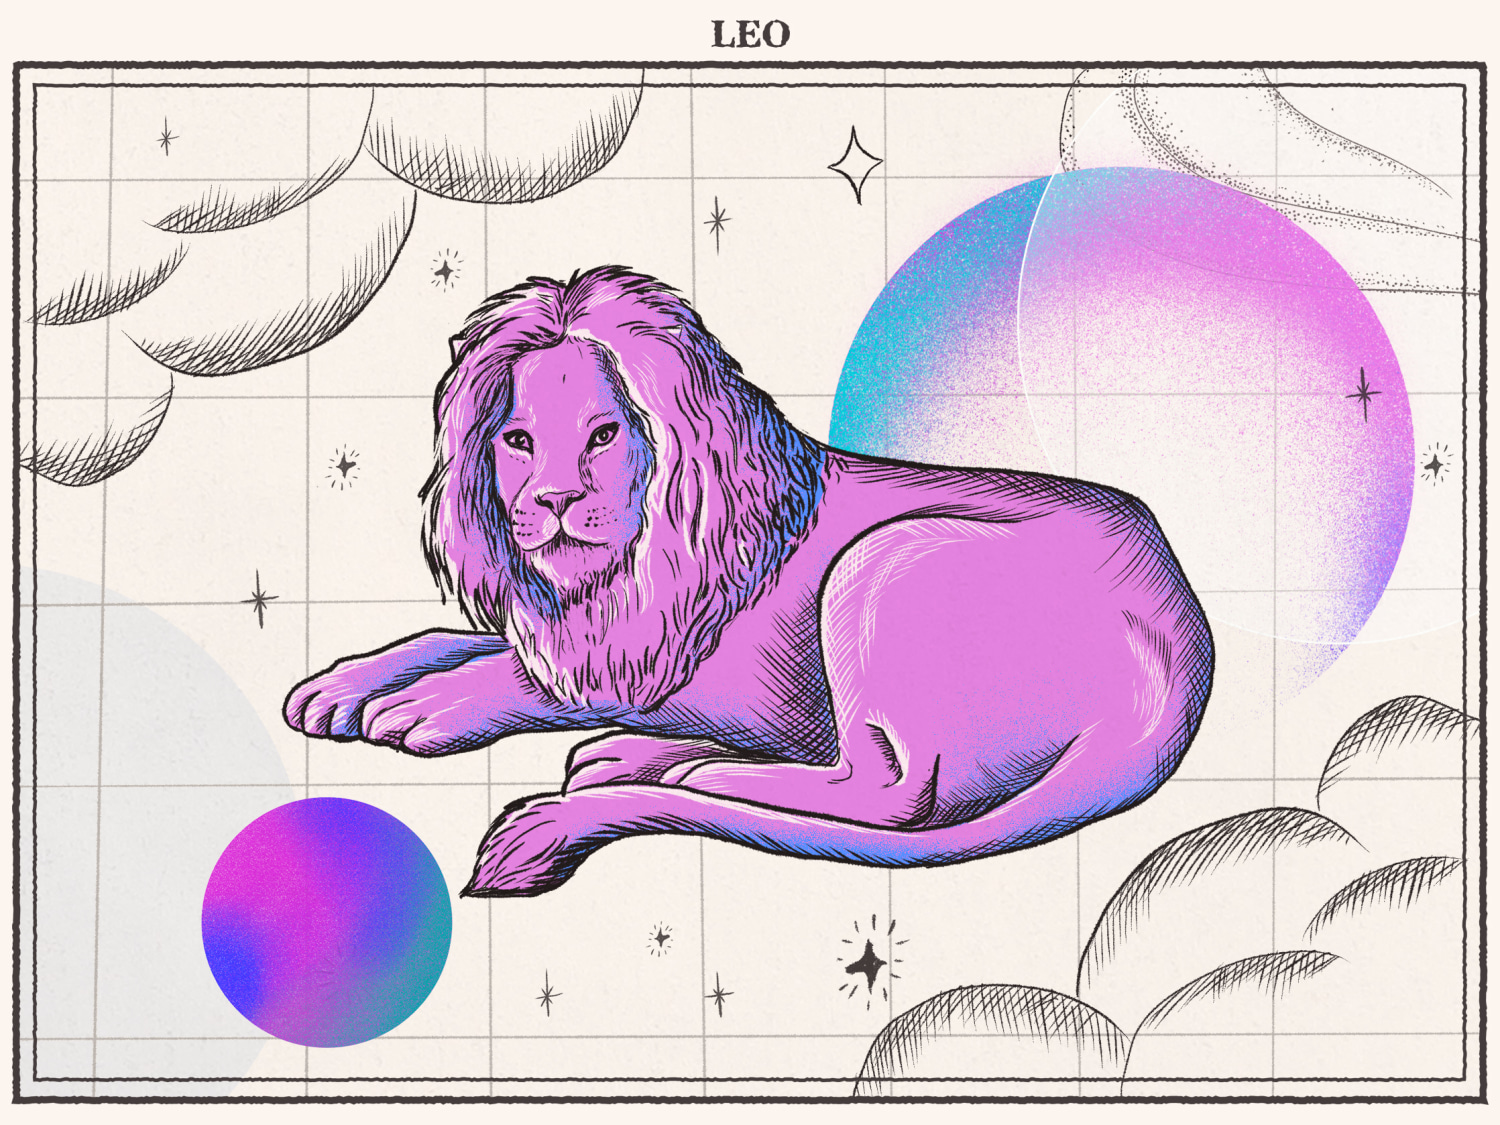 Leo Sun Sign: Personality Traits, Love Compatibility and More